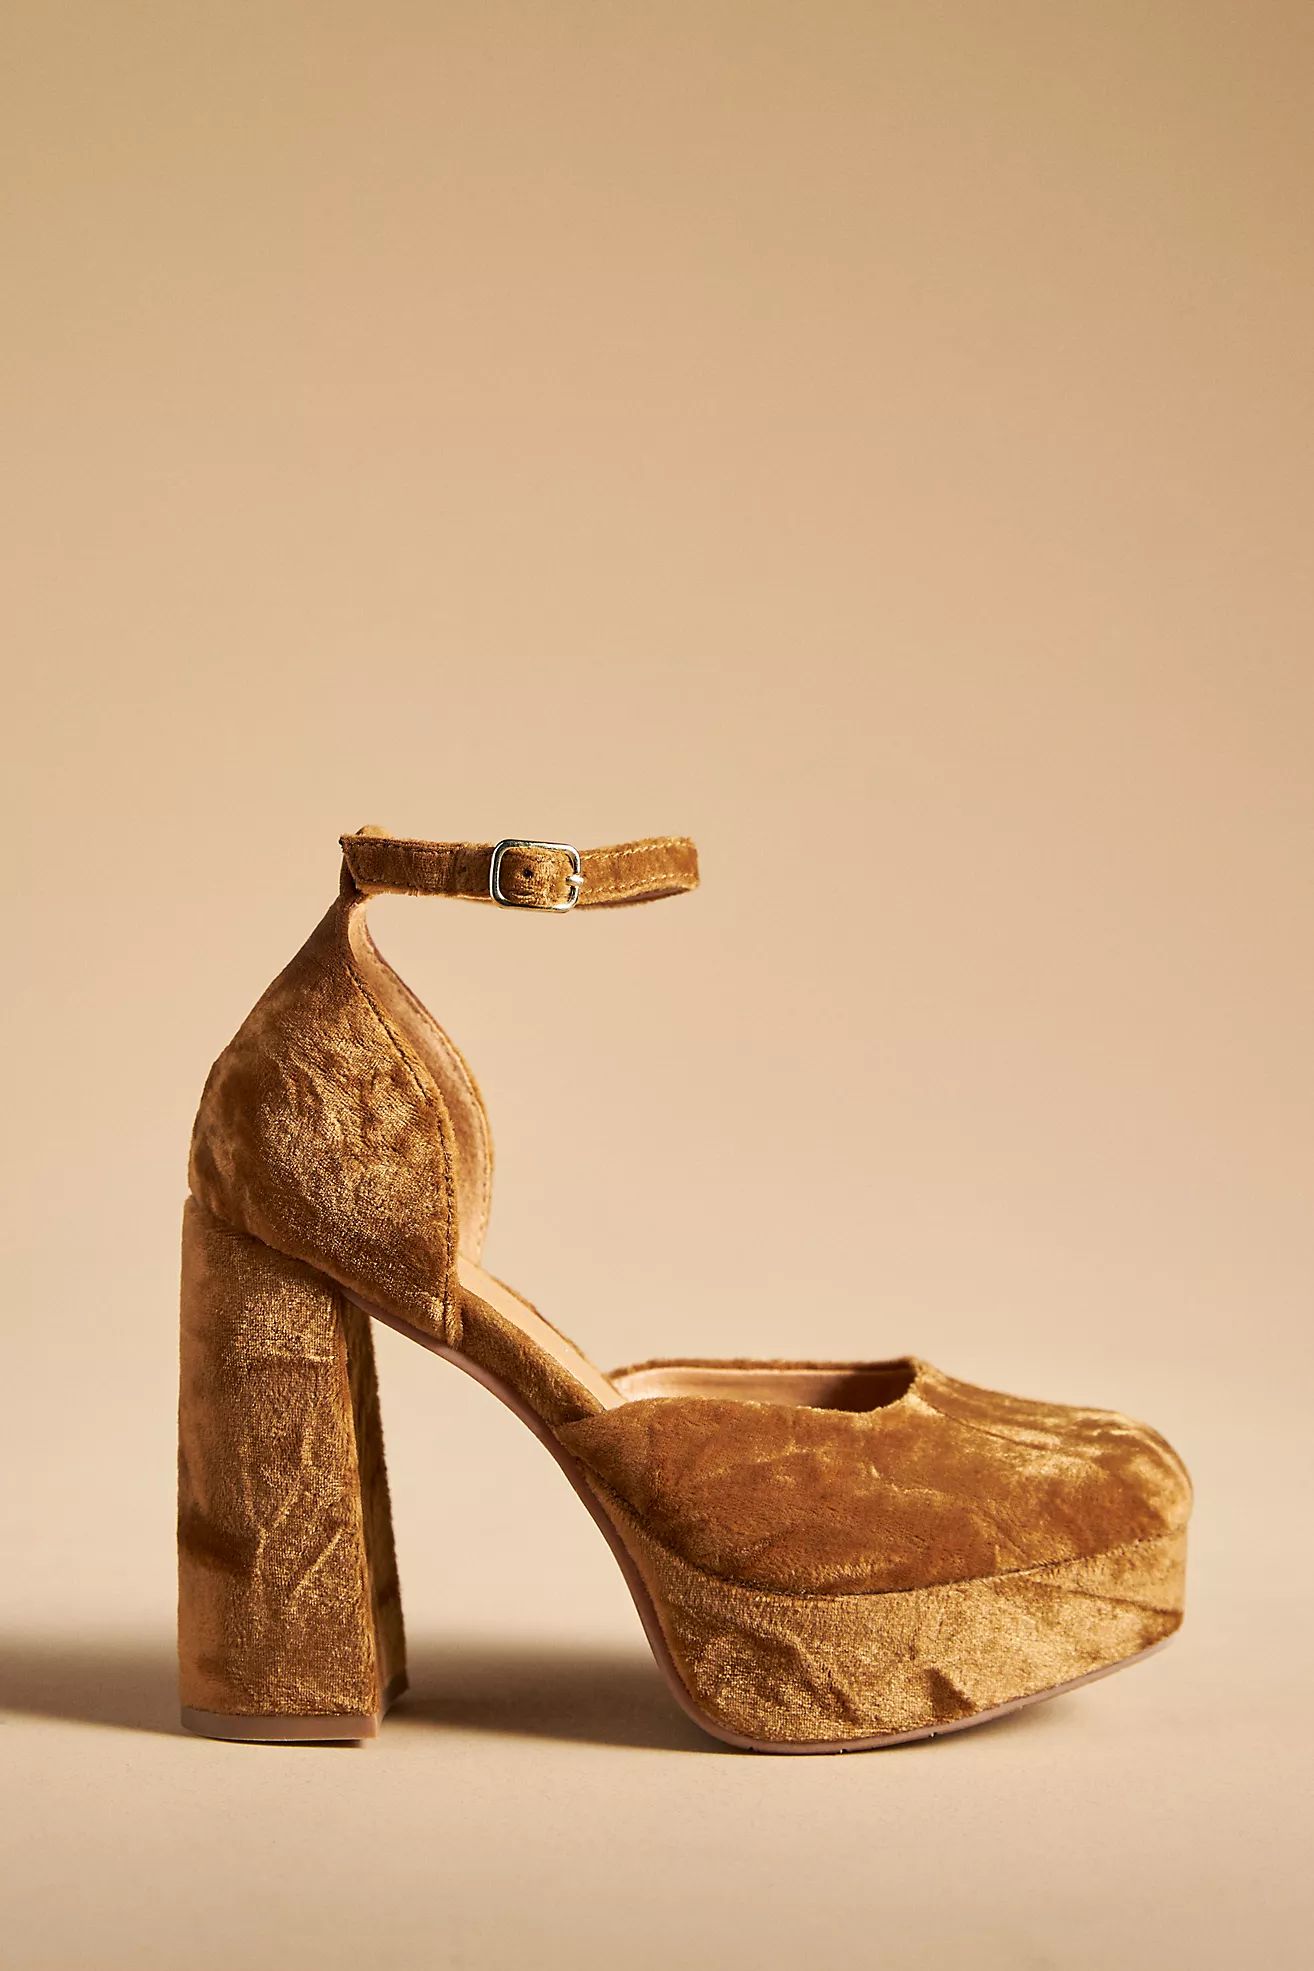 Seychelles Used to Love You Heels | Anthropologie (US)